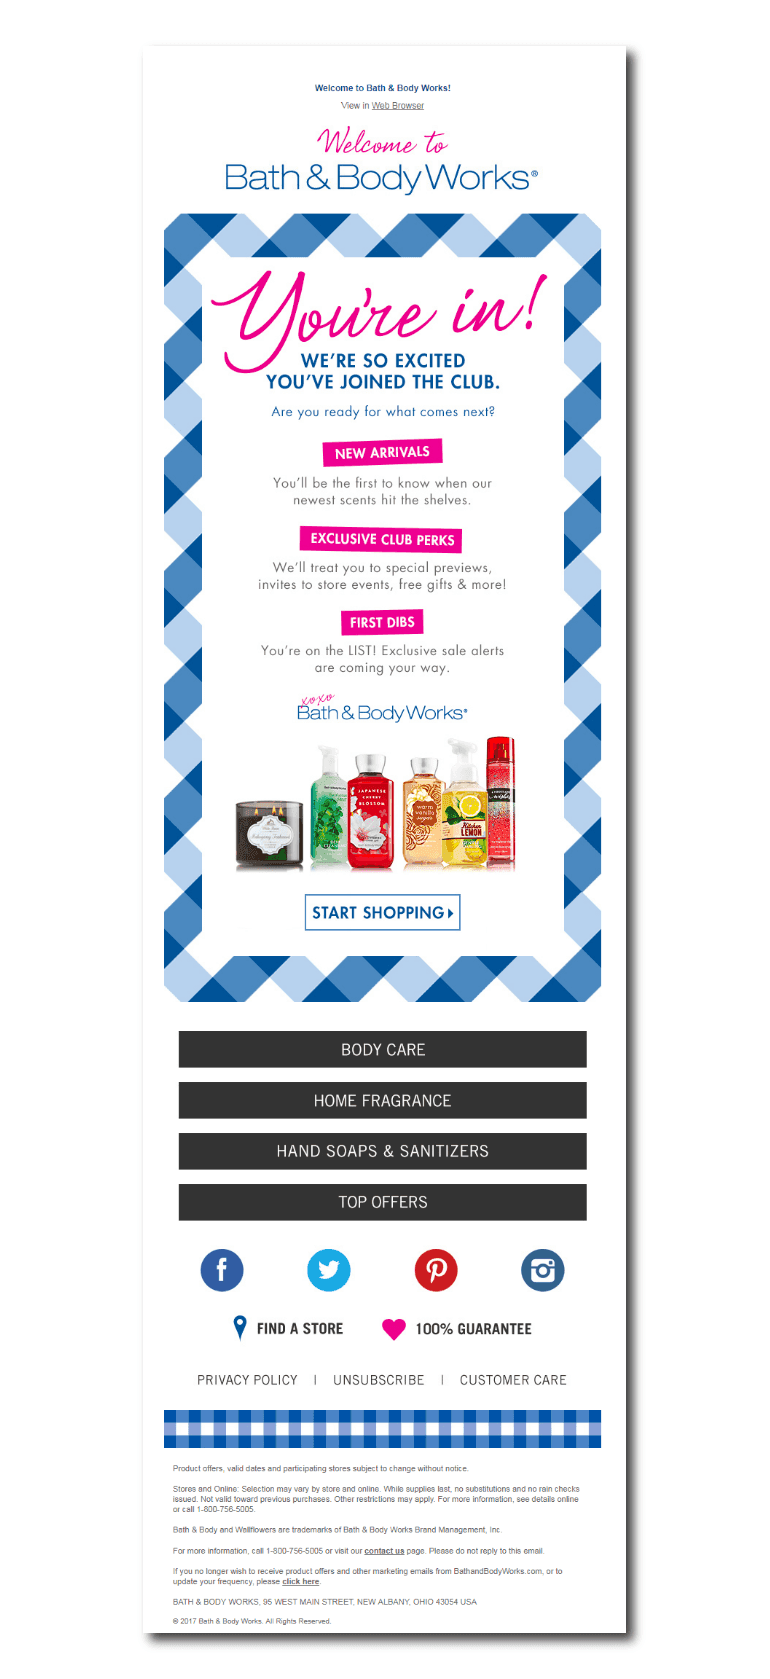 Example of a welcome email from Bath and Body Works